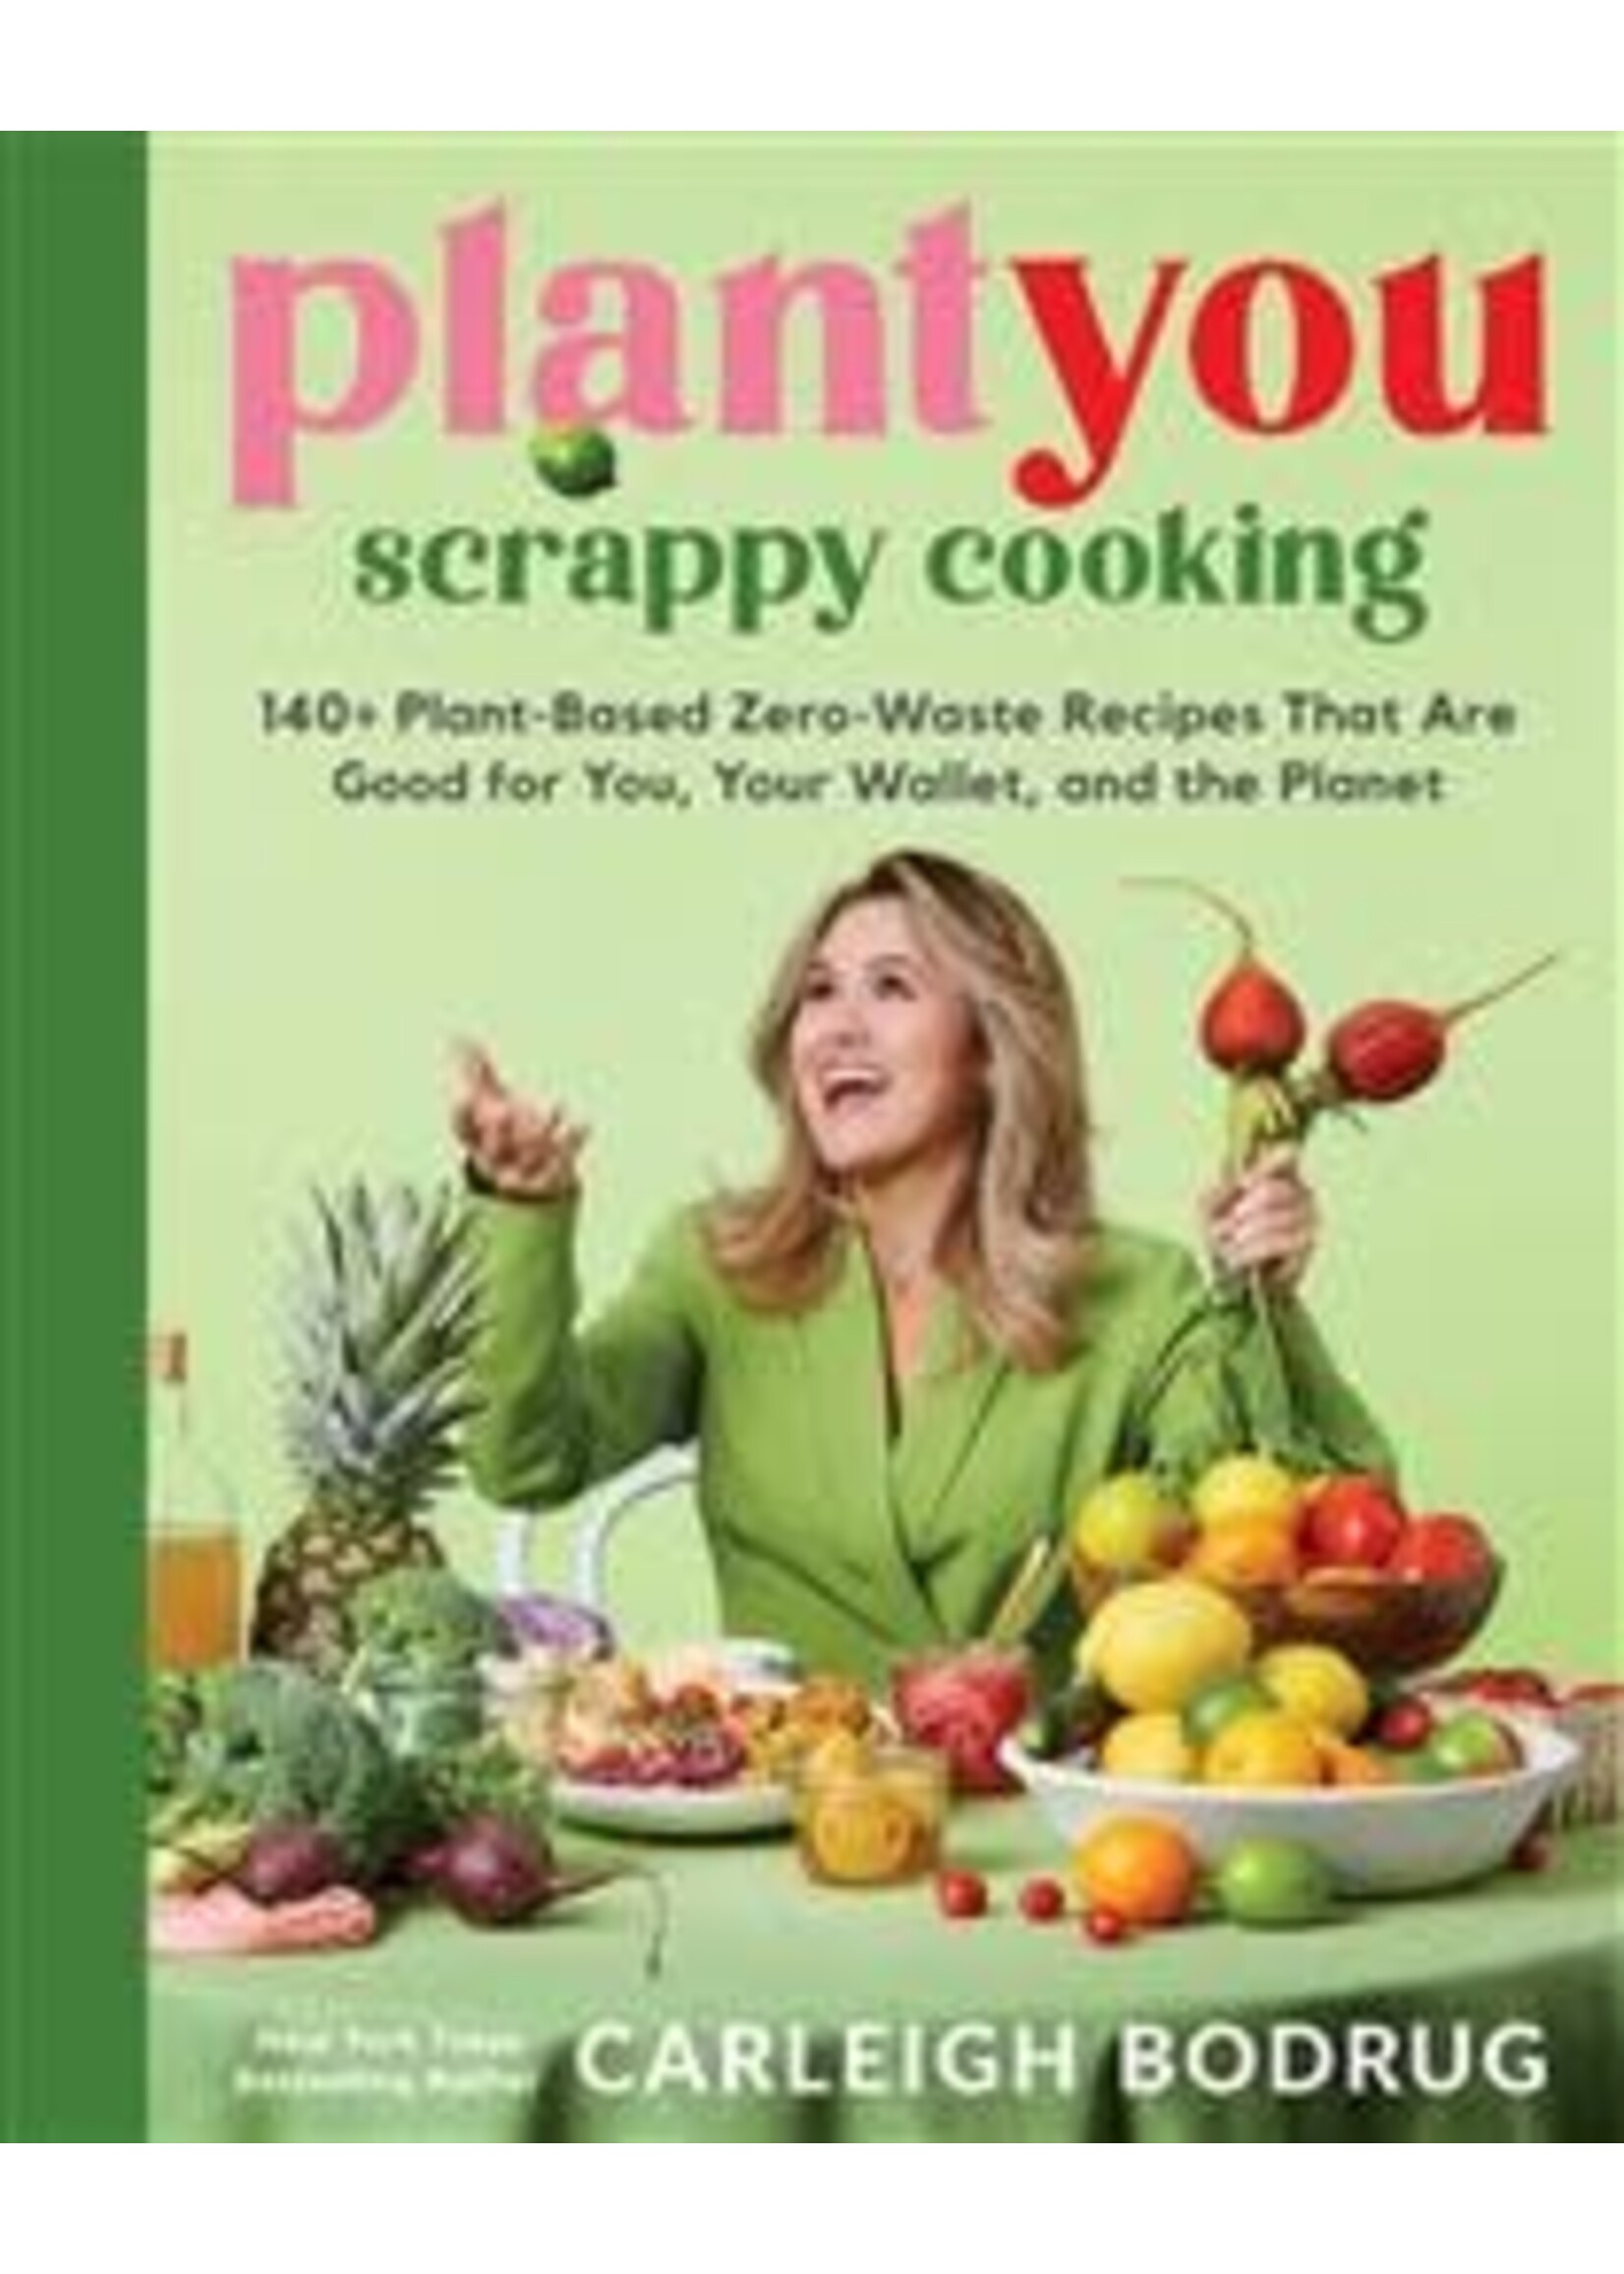 PlantYou: Scrappy Cooking - 140+ Plant-Based Zero-Waste Recipes That Are Good for You, Your Wallet, and the Planet by Carleigh Bodrug